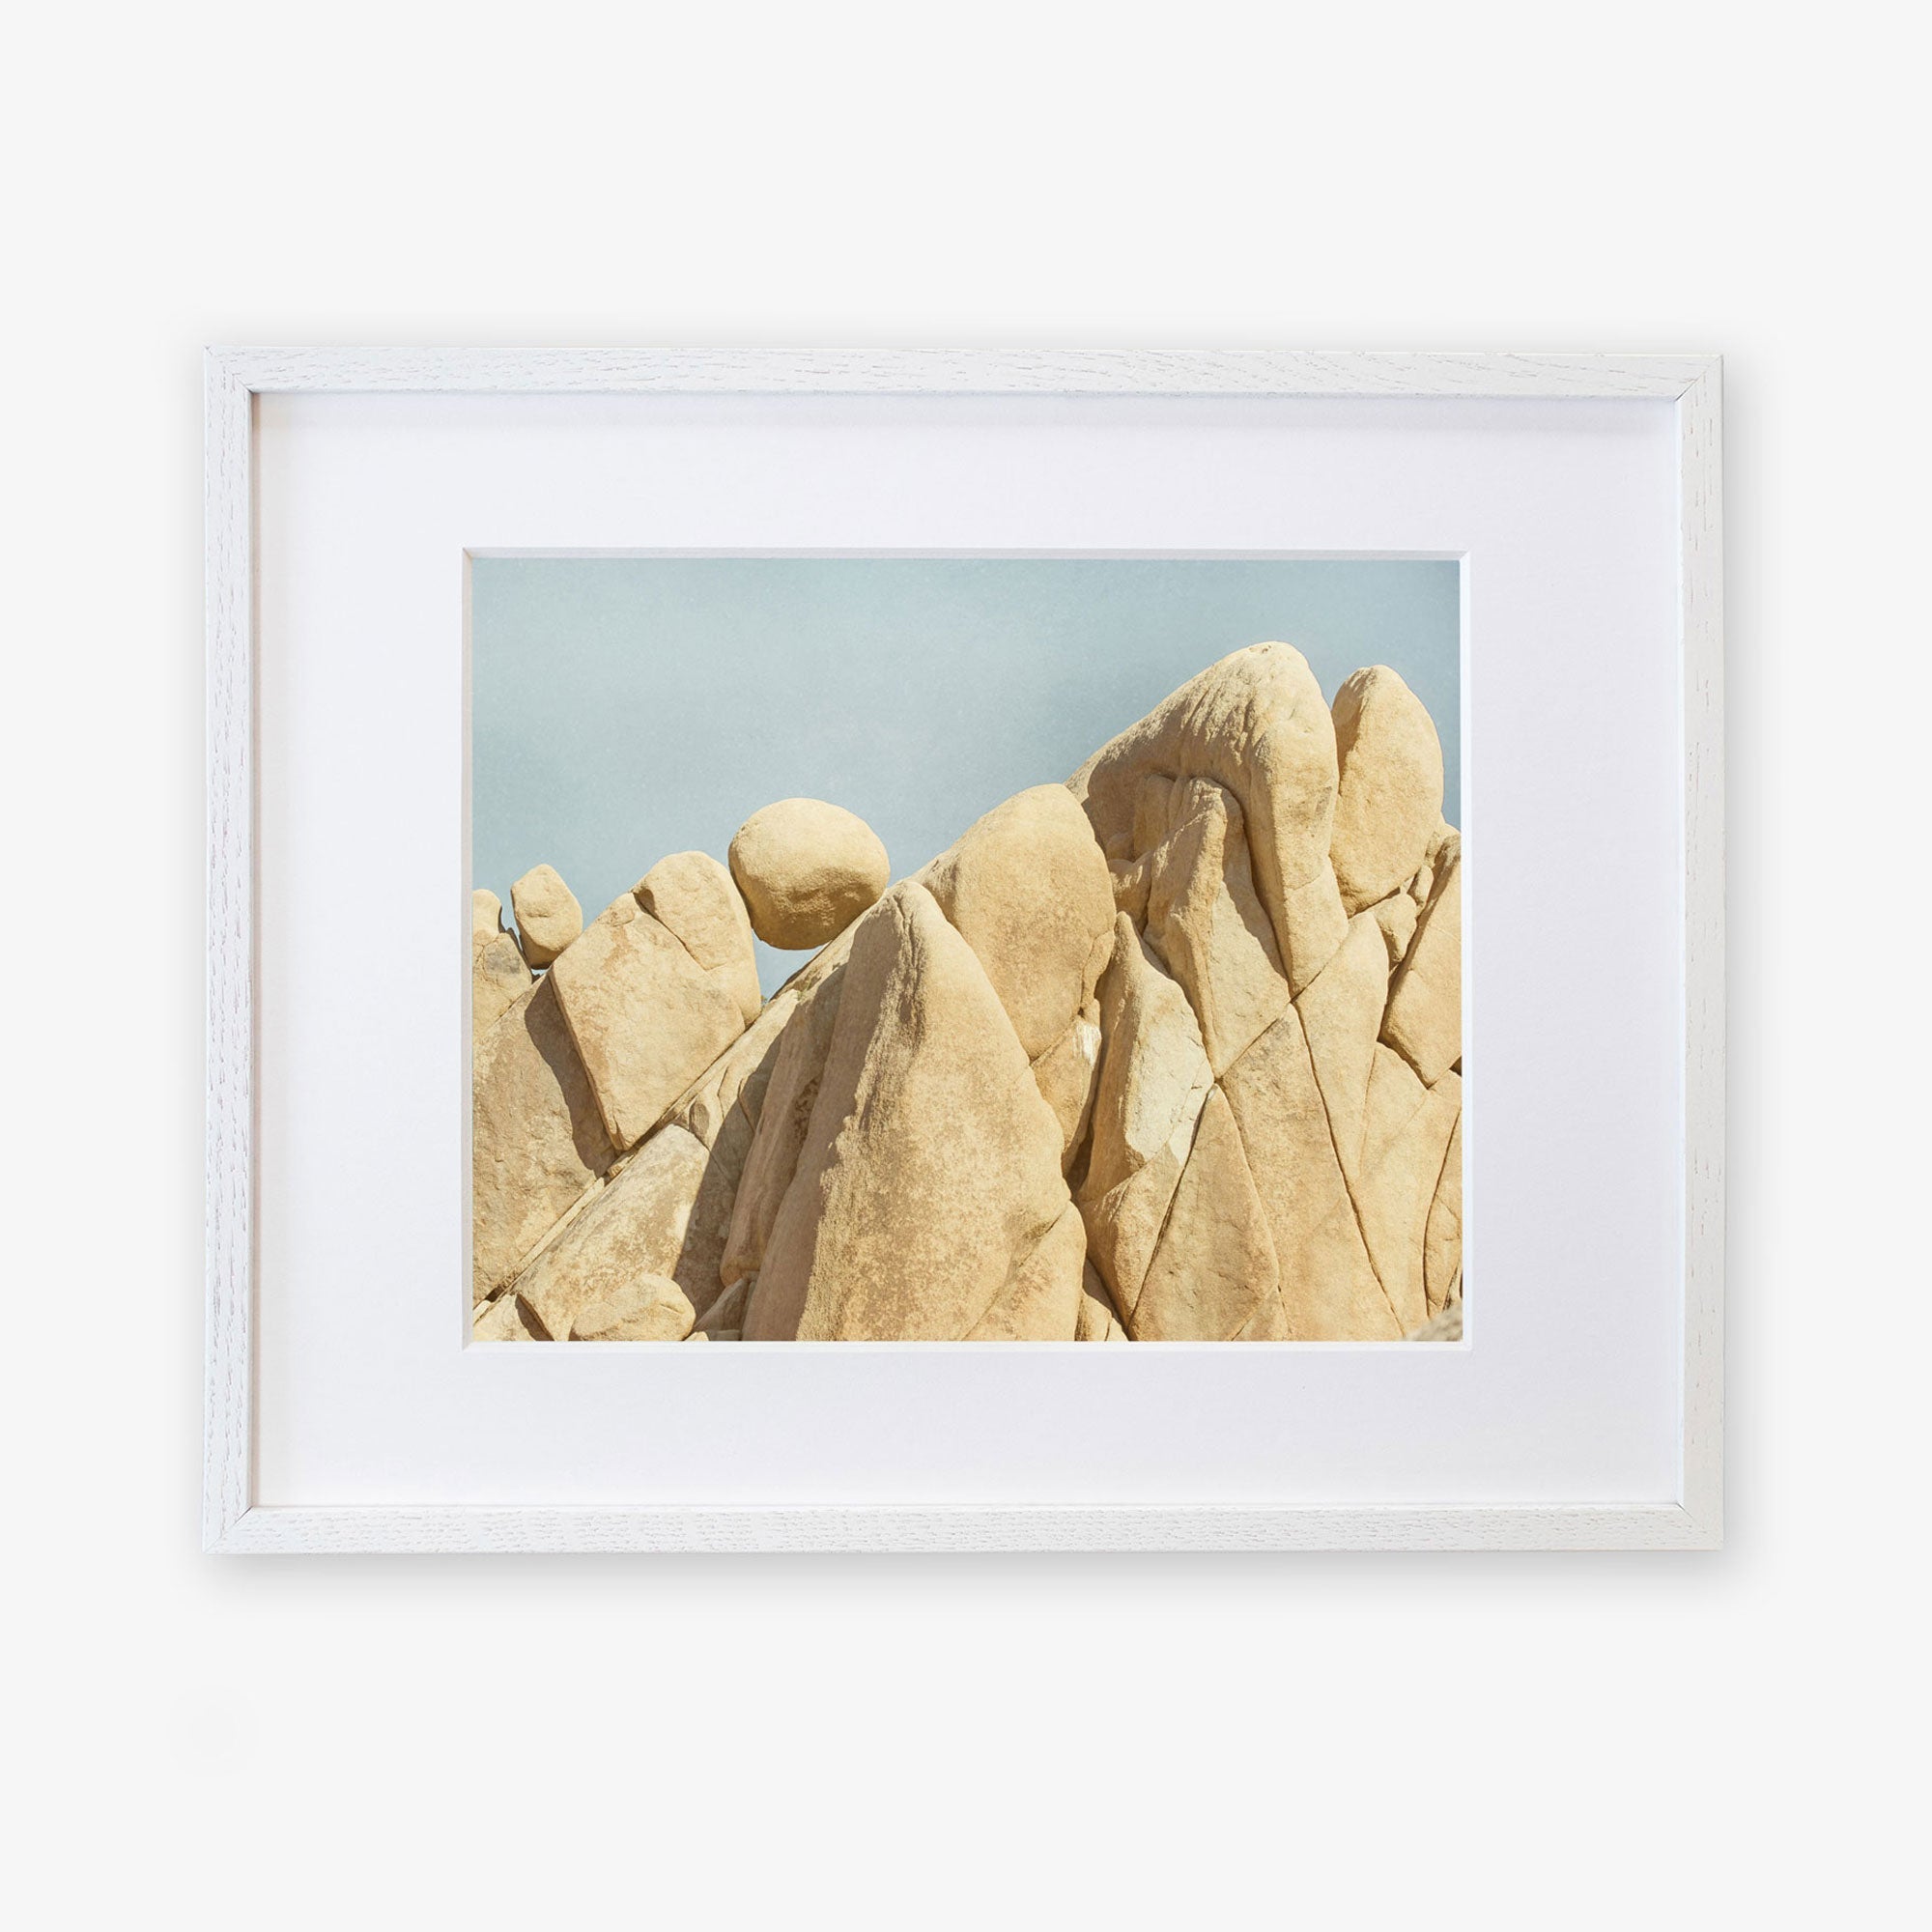 A framed photograph of jagged, beige rock formations in Joshua Tree National Park under a clear blue sky. The Offley Green frame is simple and white, highlighting the natural beauty of the geological structures.